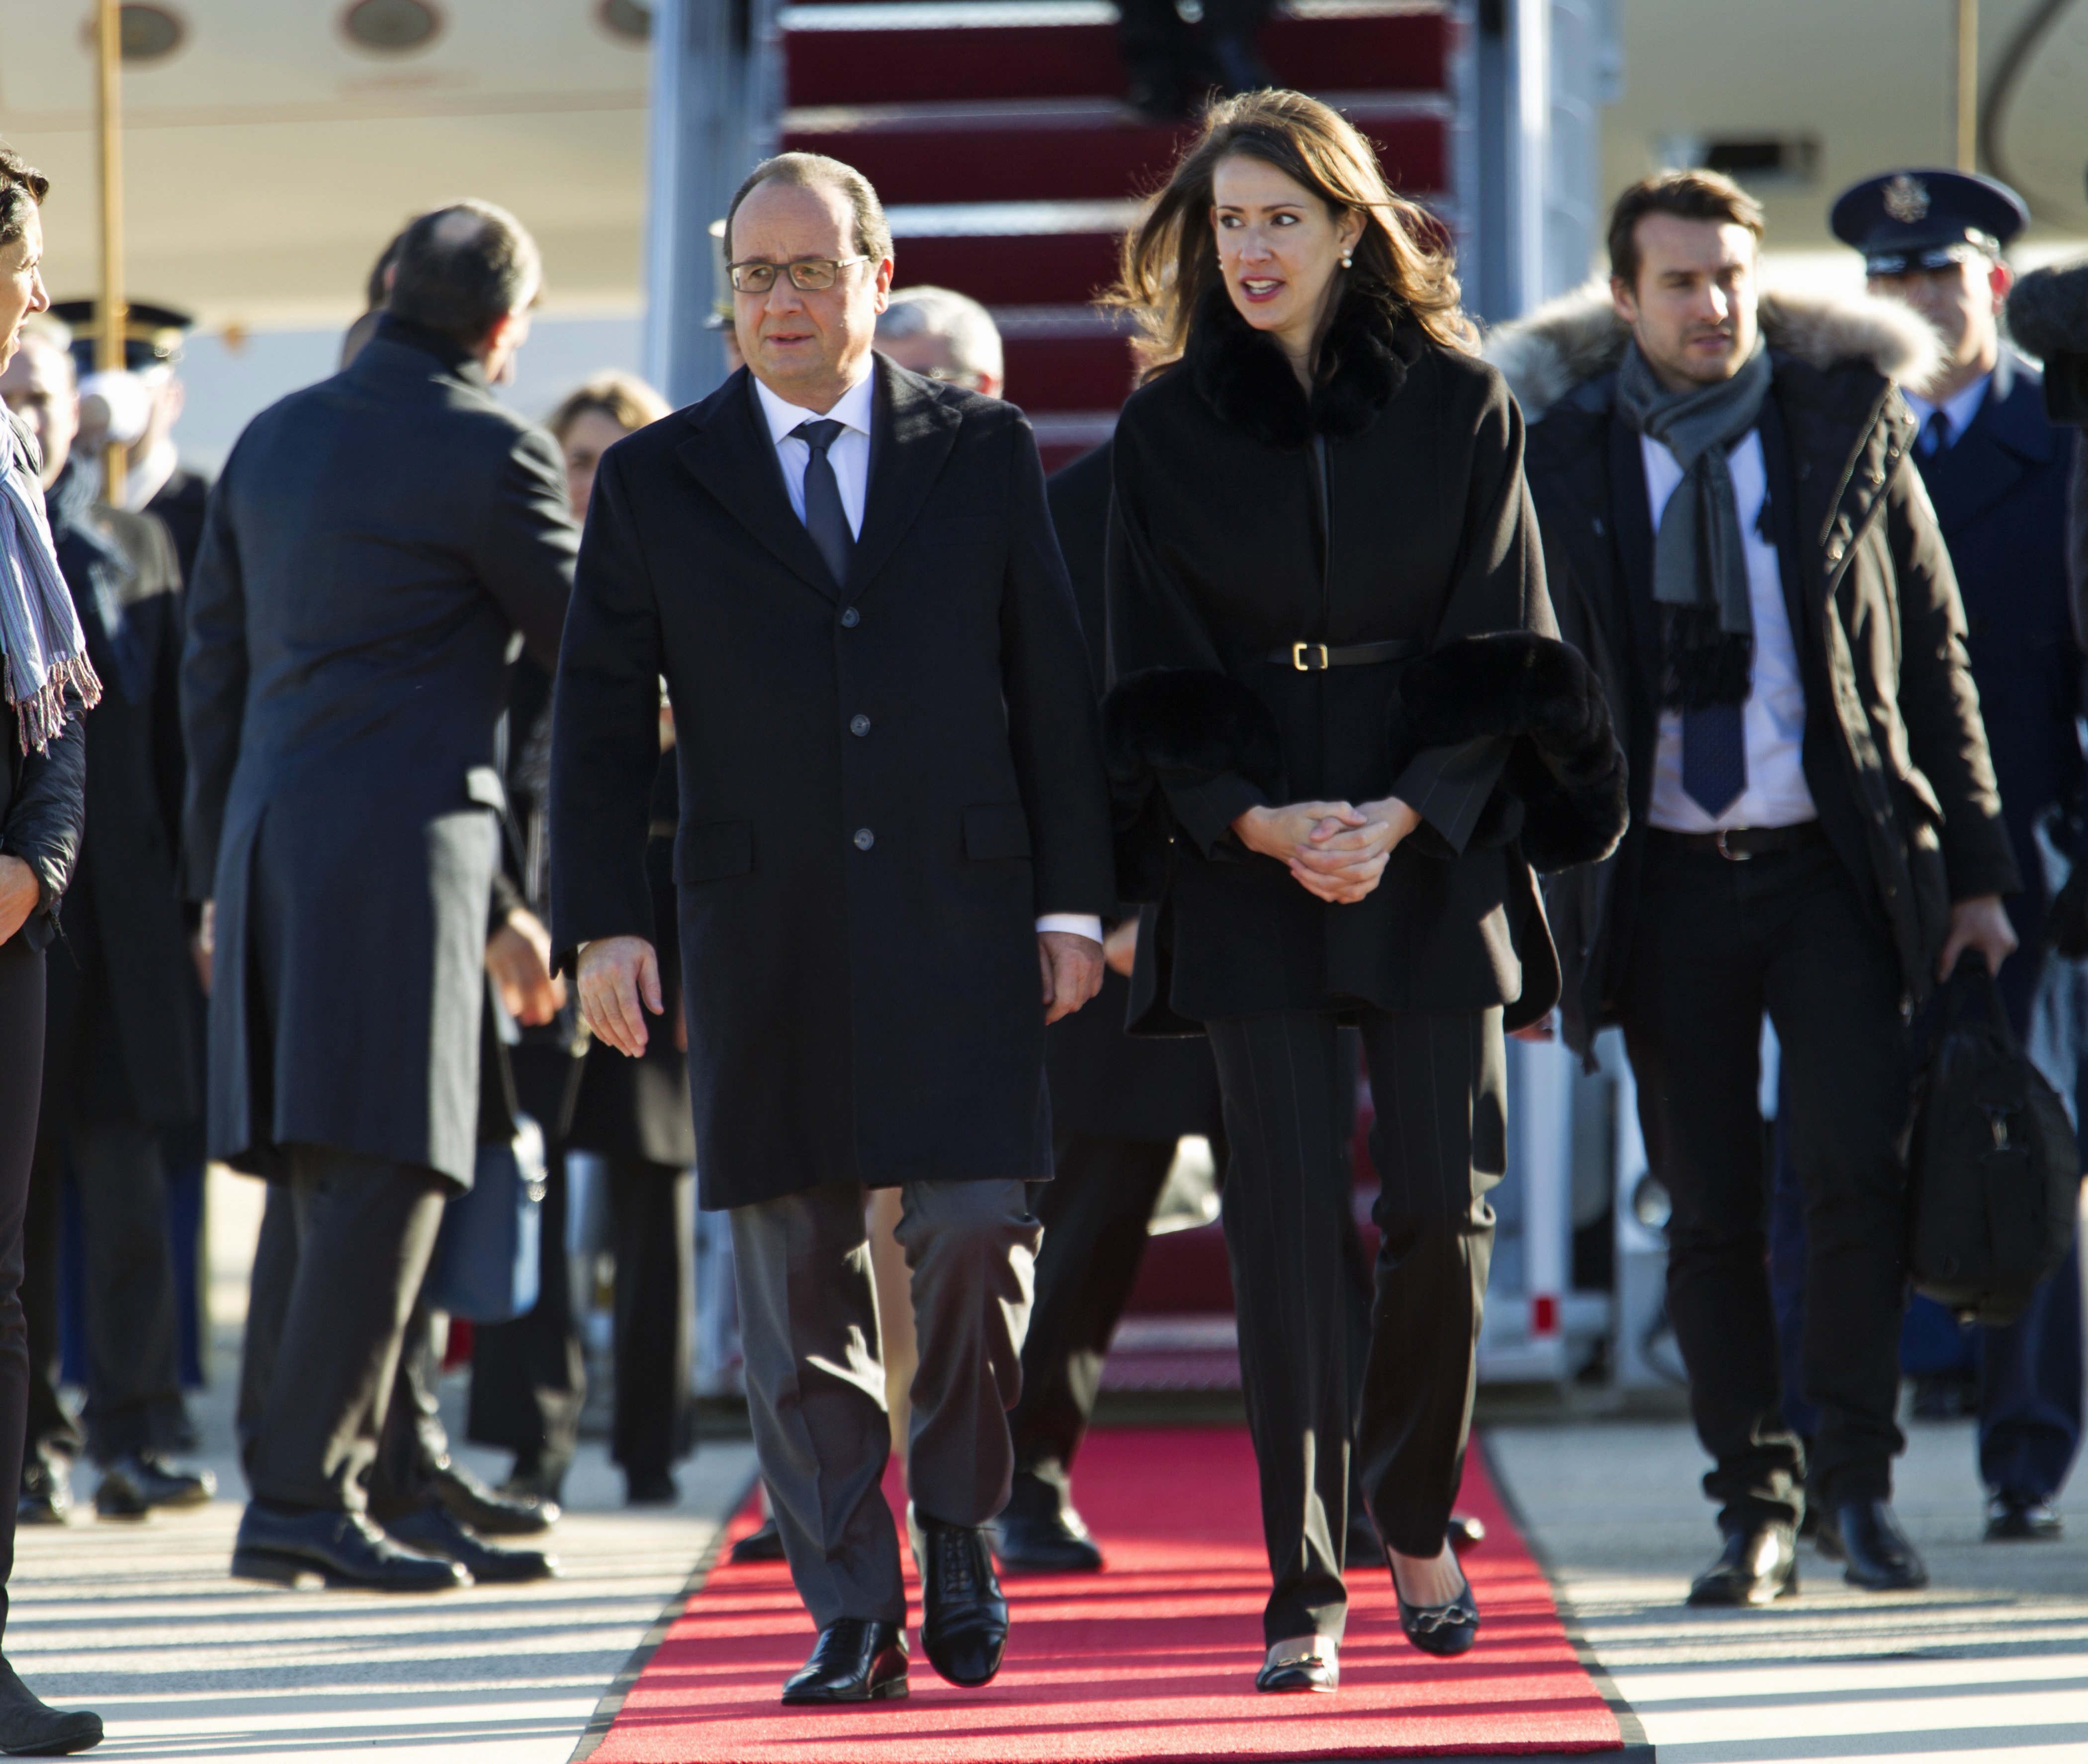 François Hollande is accompanied by U.S. Deputy Chief of Protocol Natalie Jones, upon his arrival at Andrews Air Force Base, Md. on Nov. 24, 2015. (Jose Luis Magana—AP)